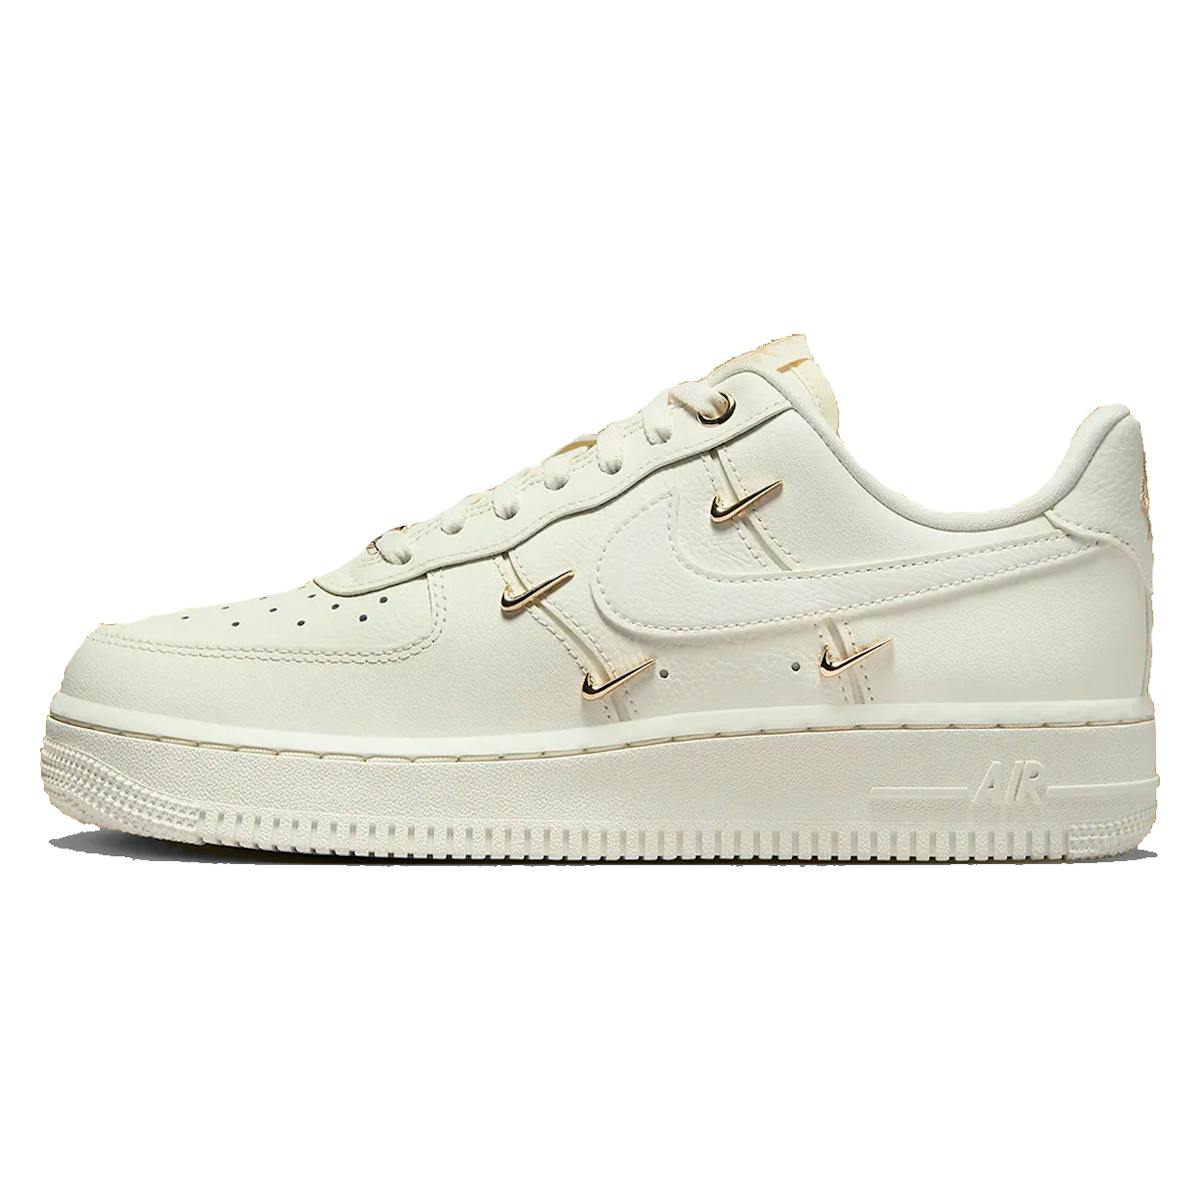 Nike Air Force 1 '07 LX "Gold Swooshes"